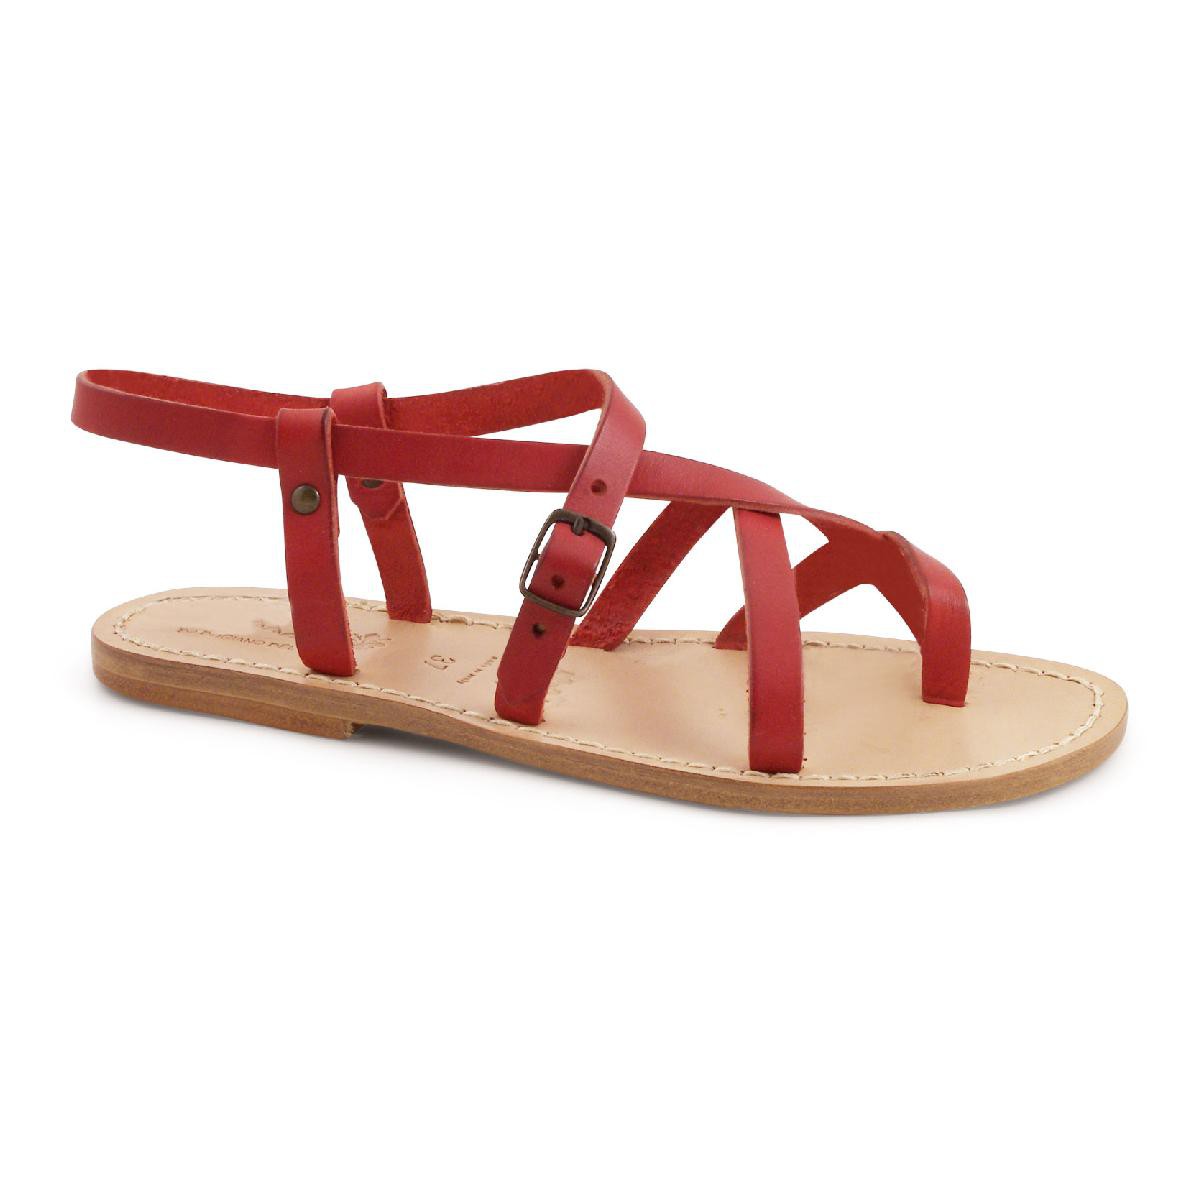 Red leather flat sandals for women 